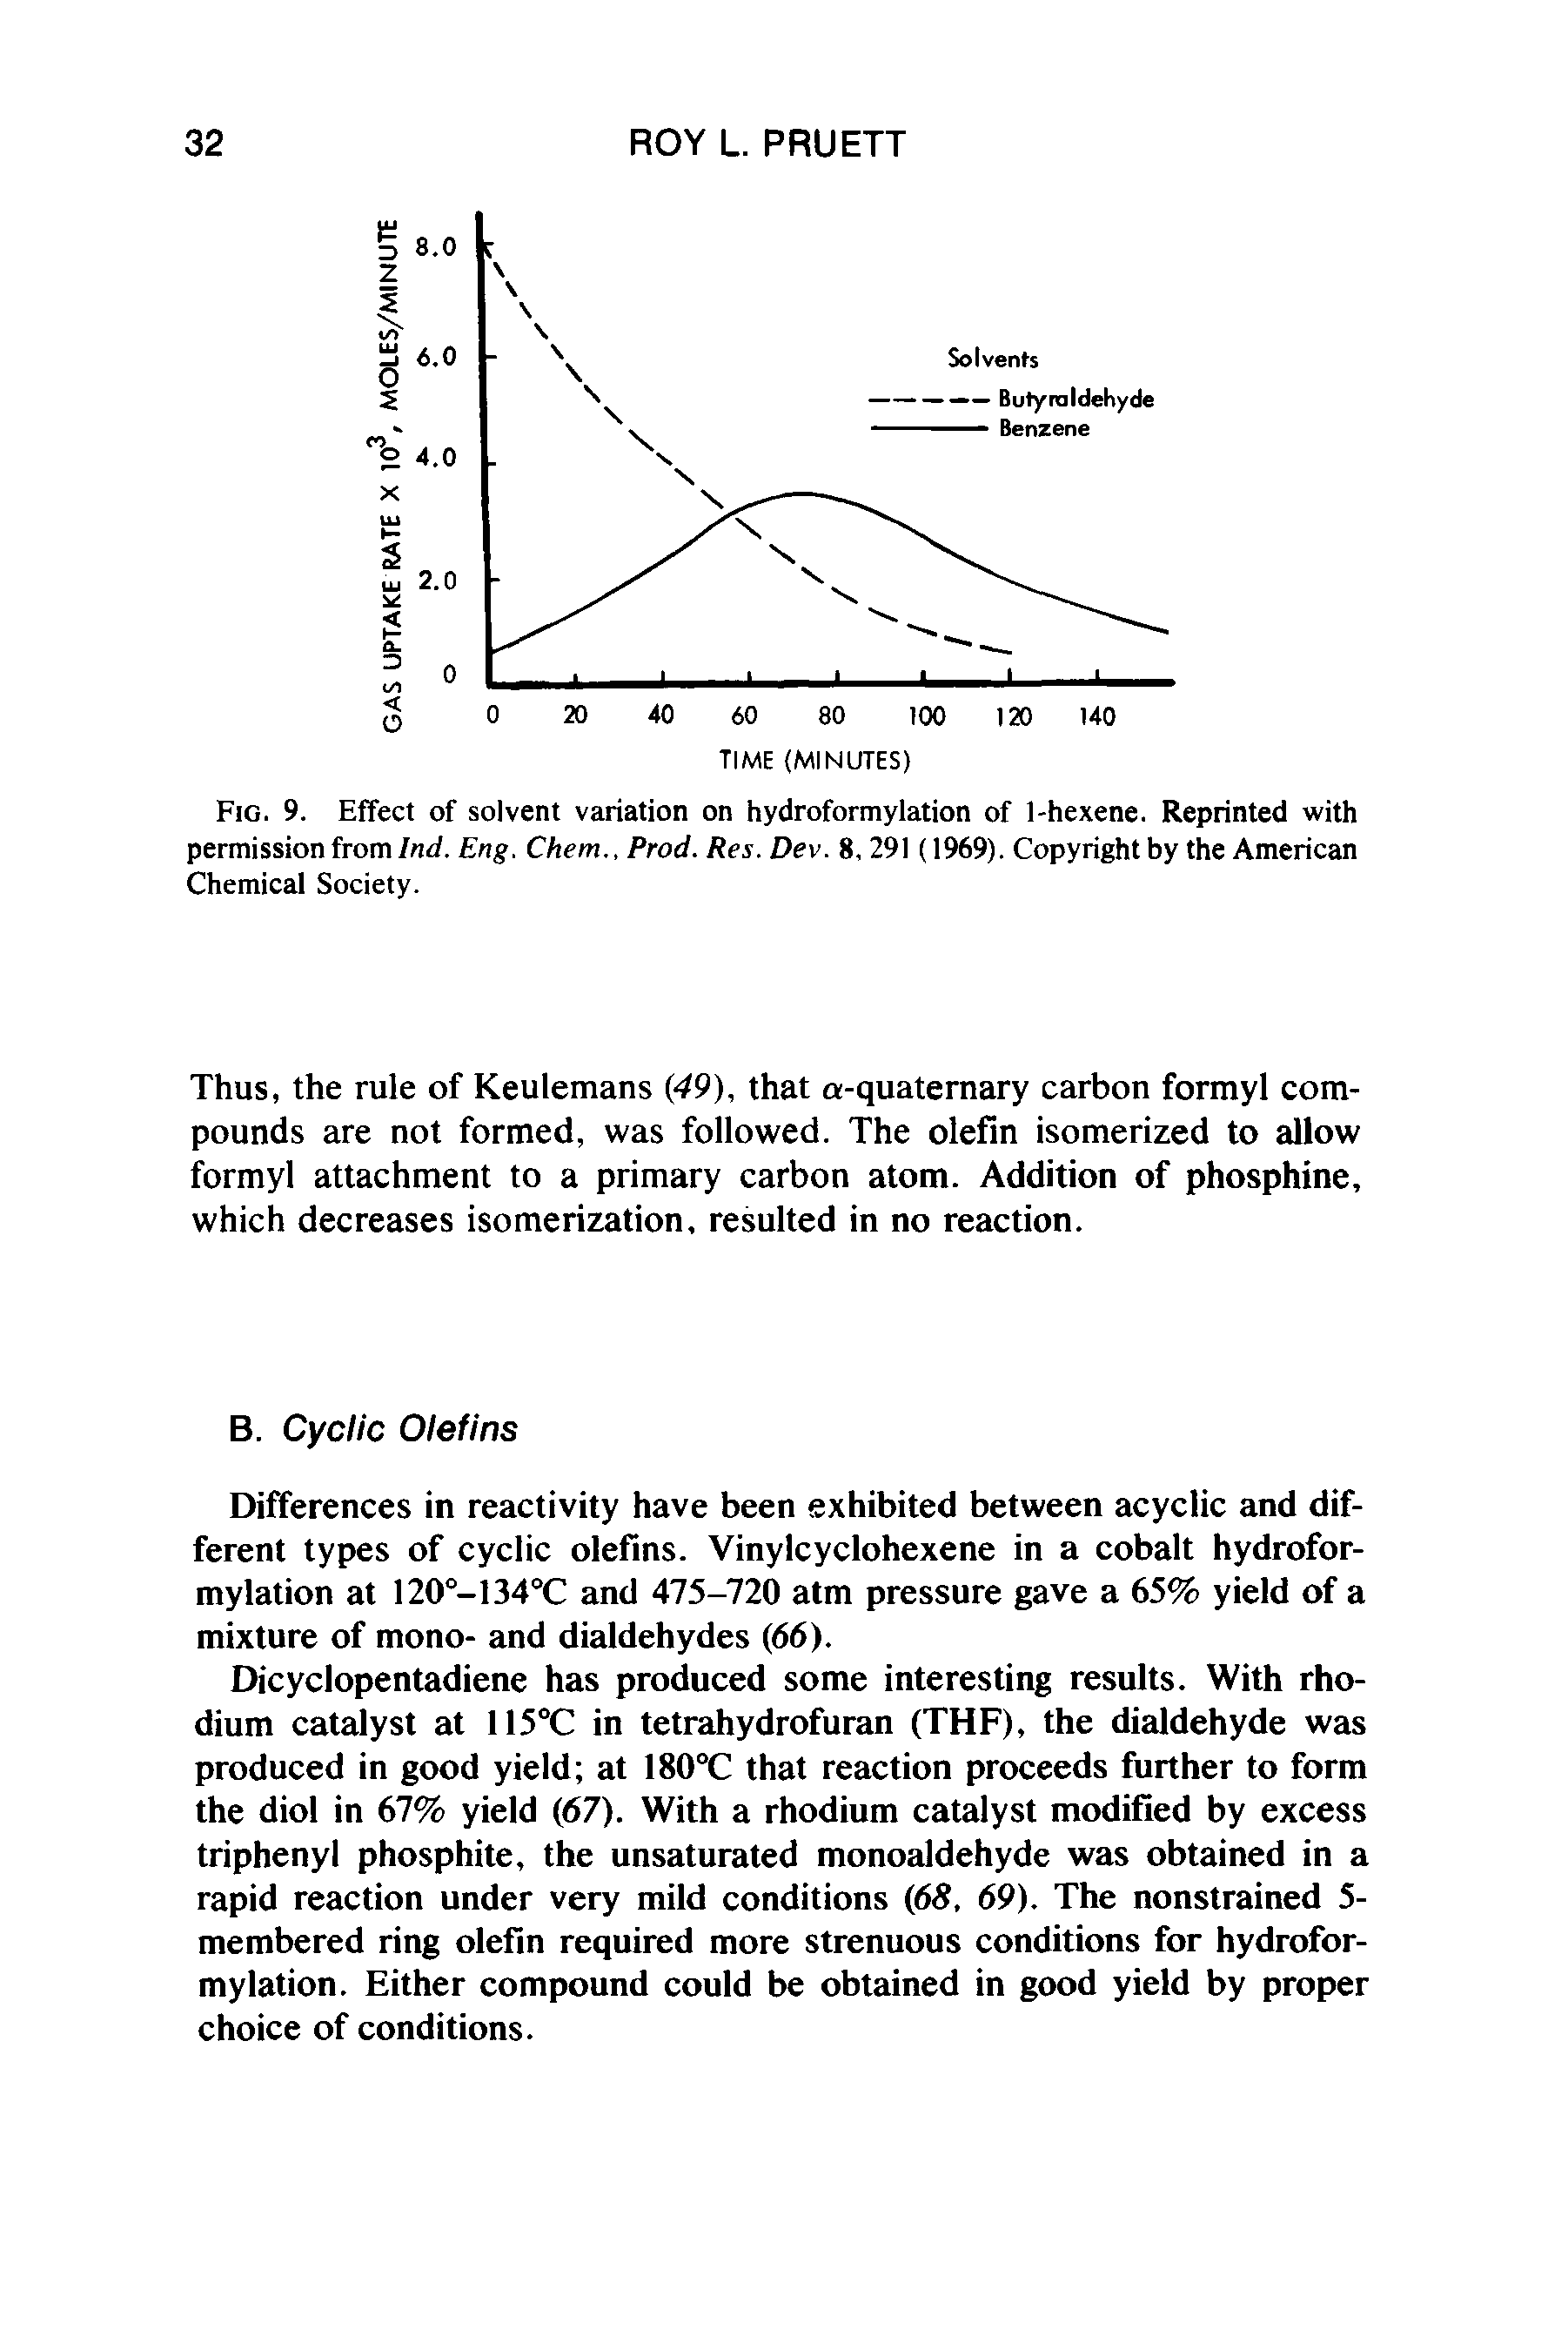 Fig. 9. Effect of solvent variation on hydroformylation of 1-hexene. Reprinted with permission from Ind, Eng. Chem., Prod. Res. Dev. 8, 291 (1969). Copyright by the American Chemical Society.